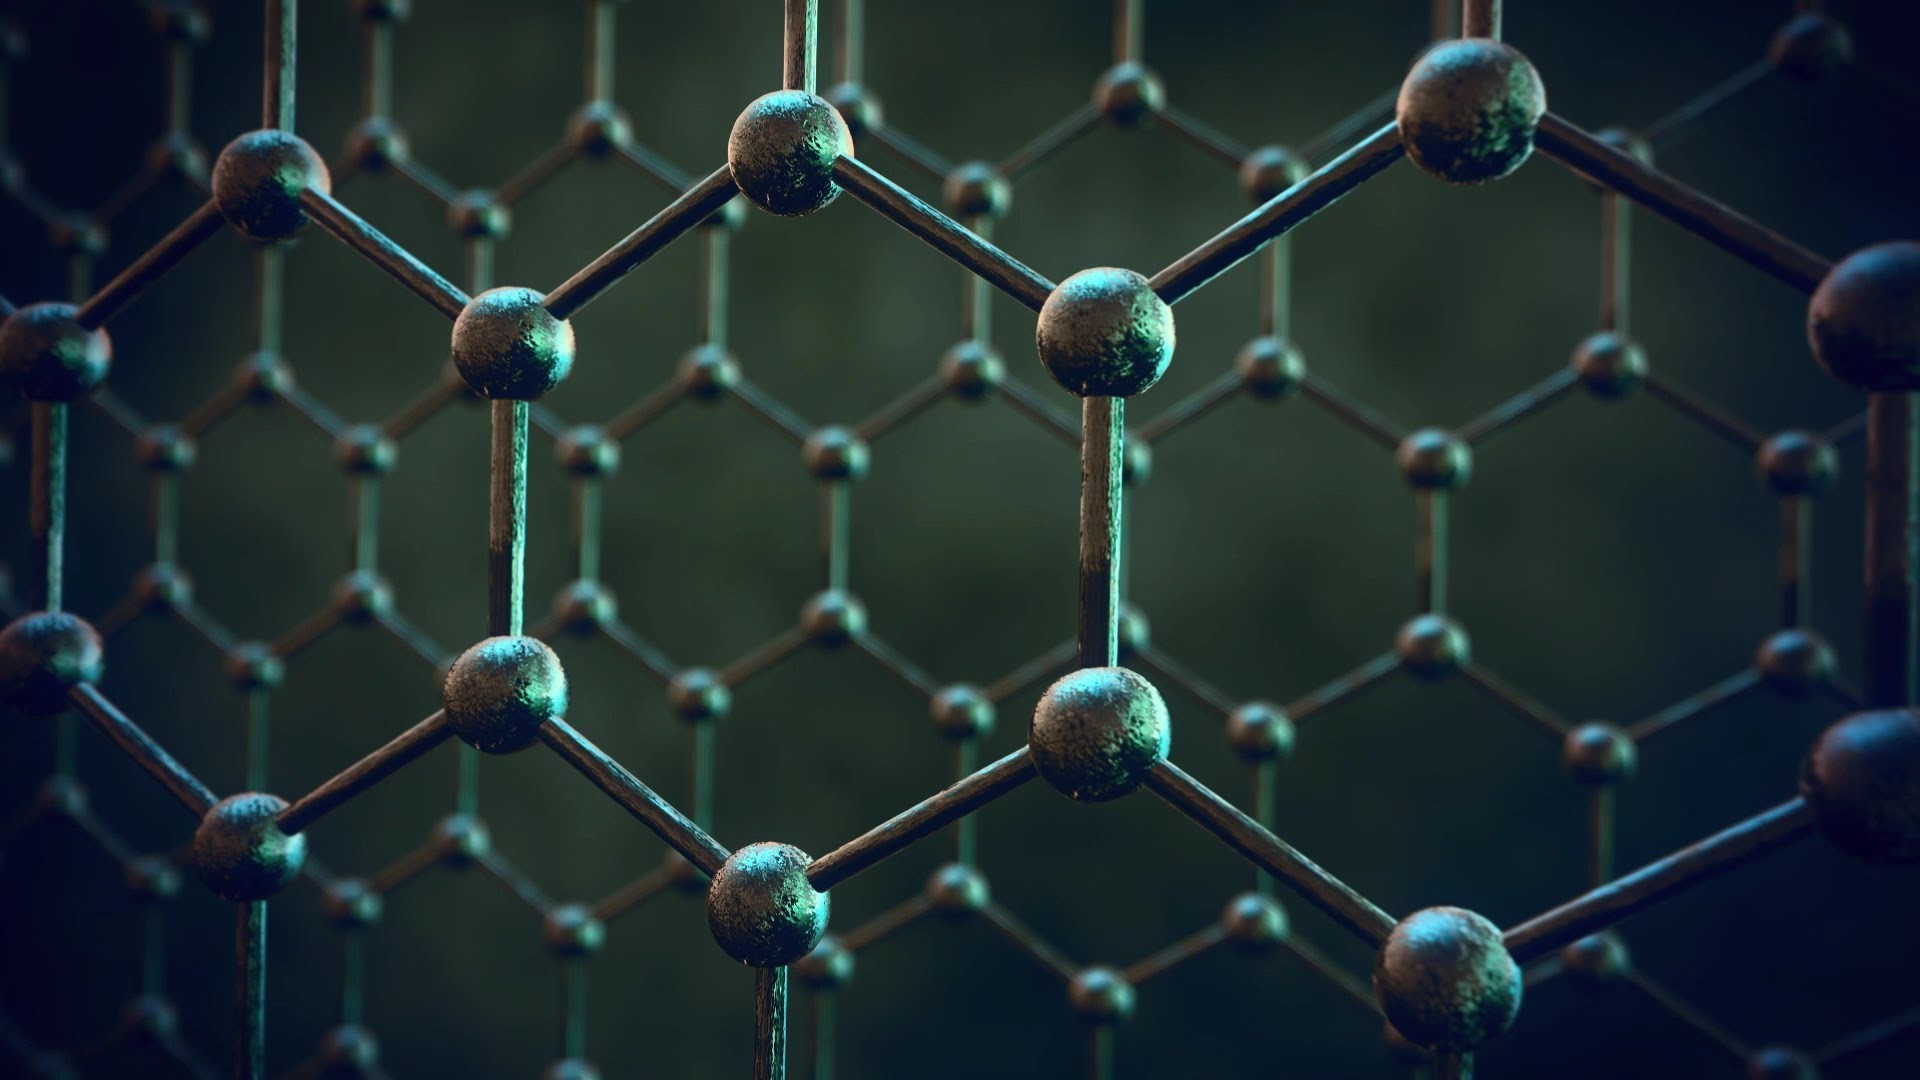 1920x1080 digital art minimalism texture simple simple background atoms hexagon ball depth of field blurred structure graphene chemical structures wallpaper JPG 183 kB